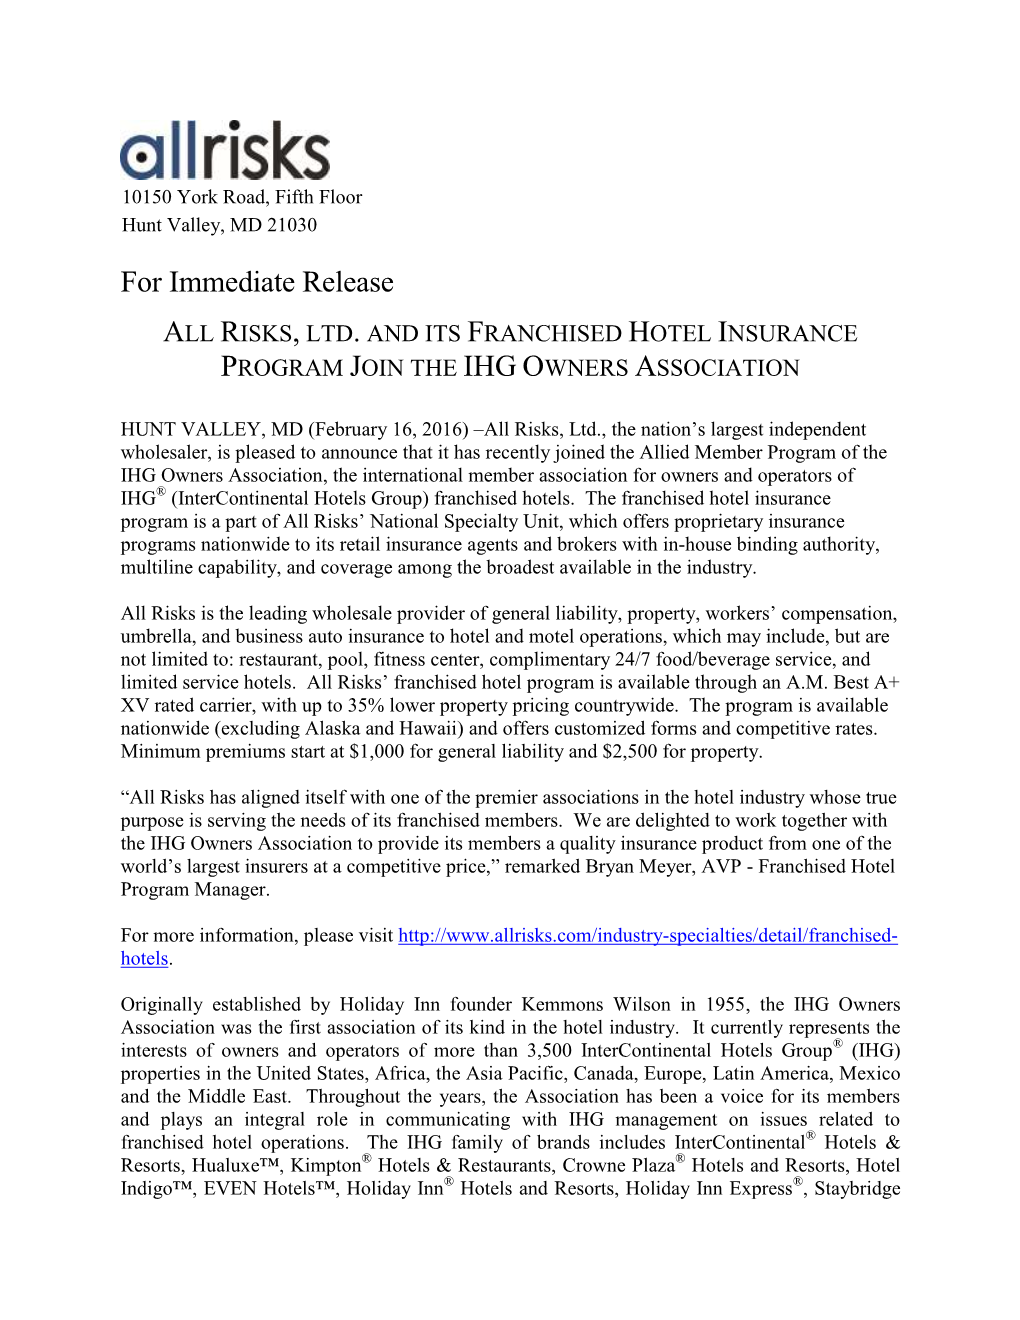 All Risks, Ltd. and Its Franchised Hotel Insurance Program Join the Ihg Owners Association